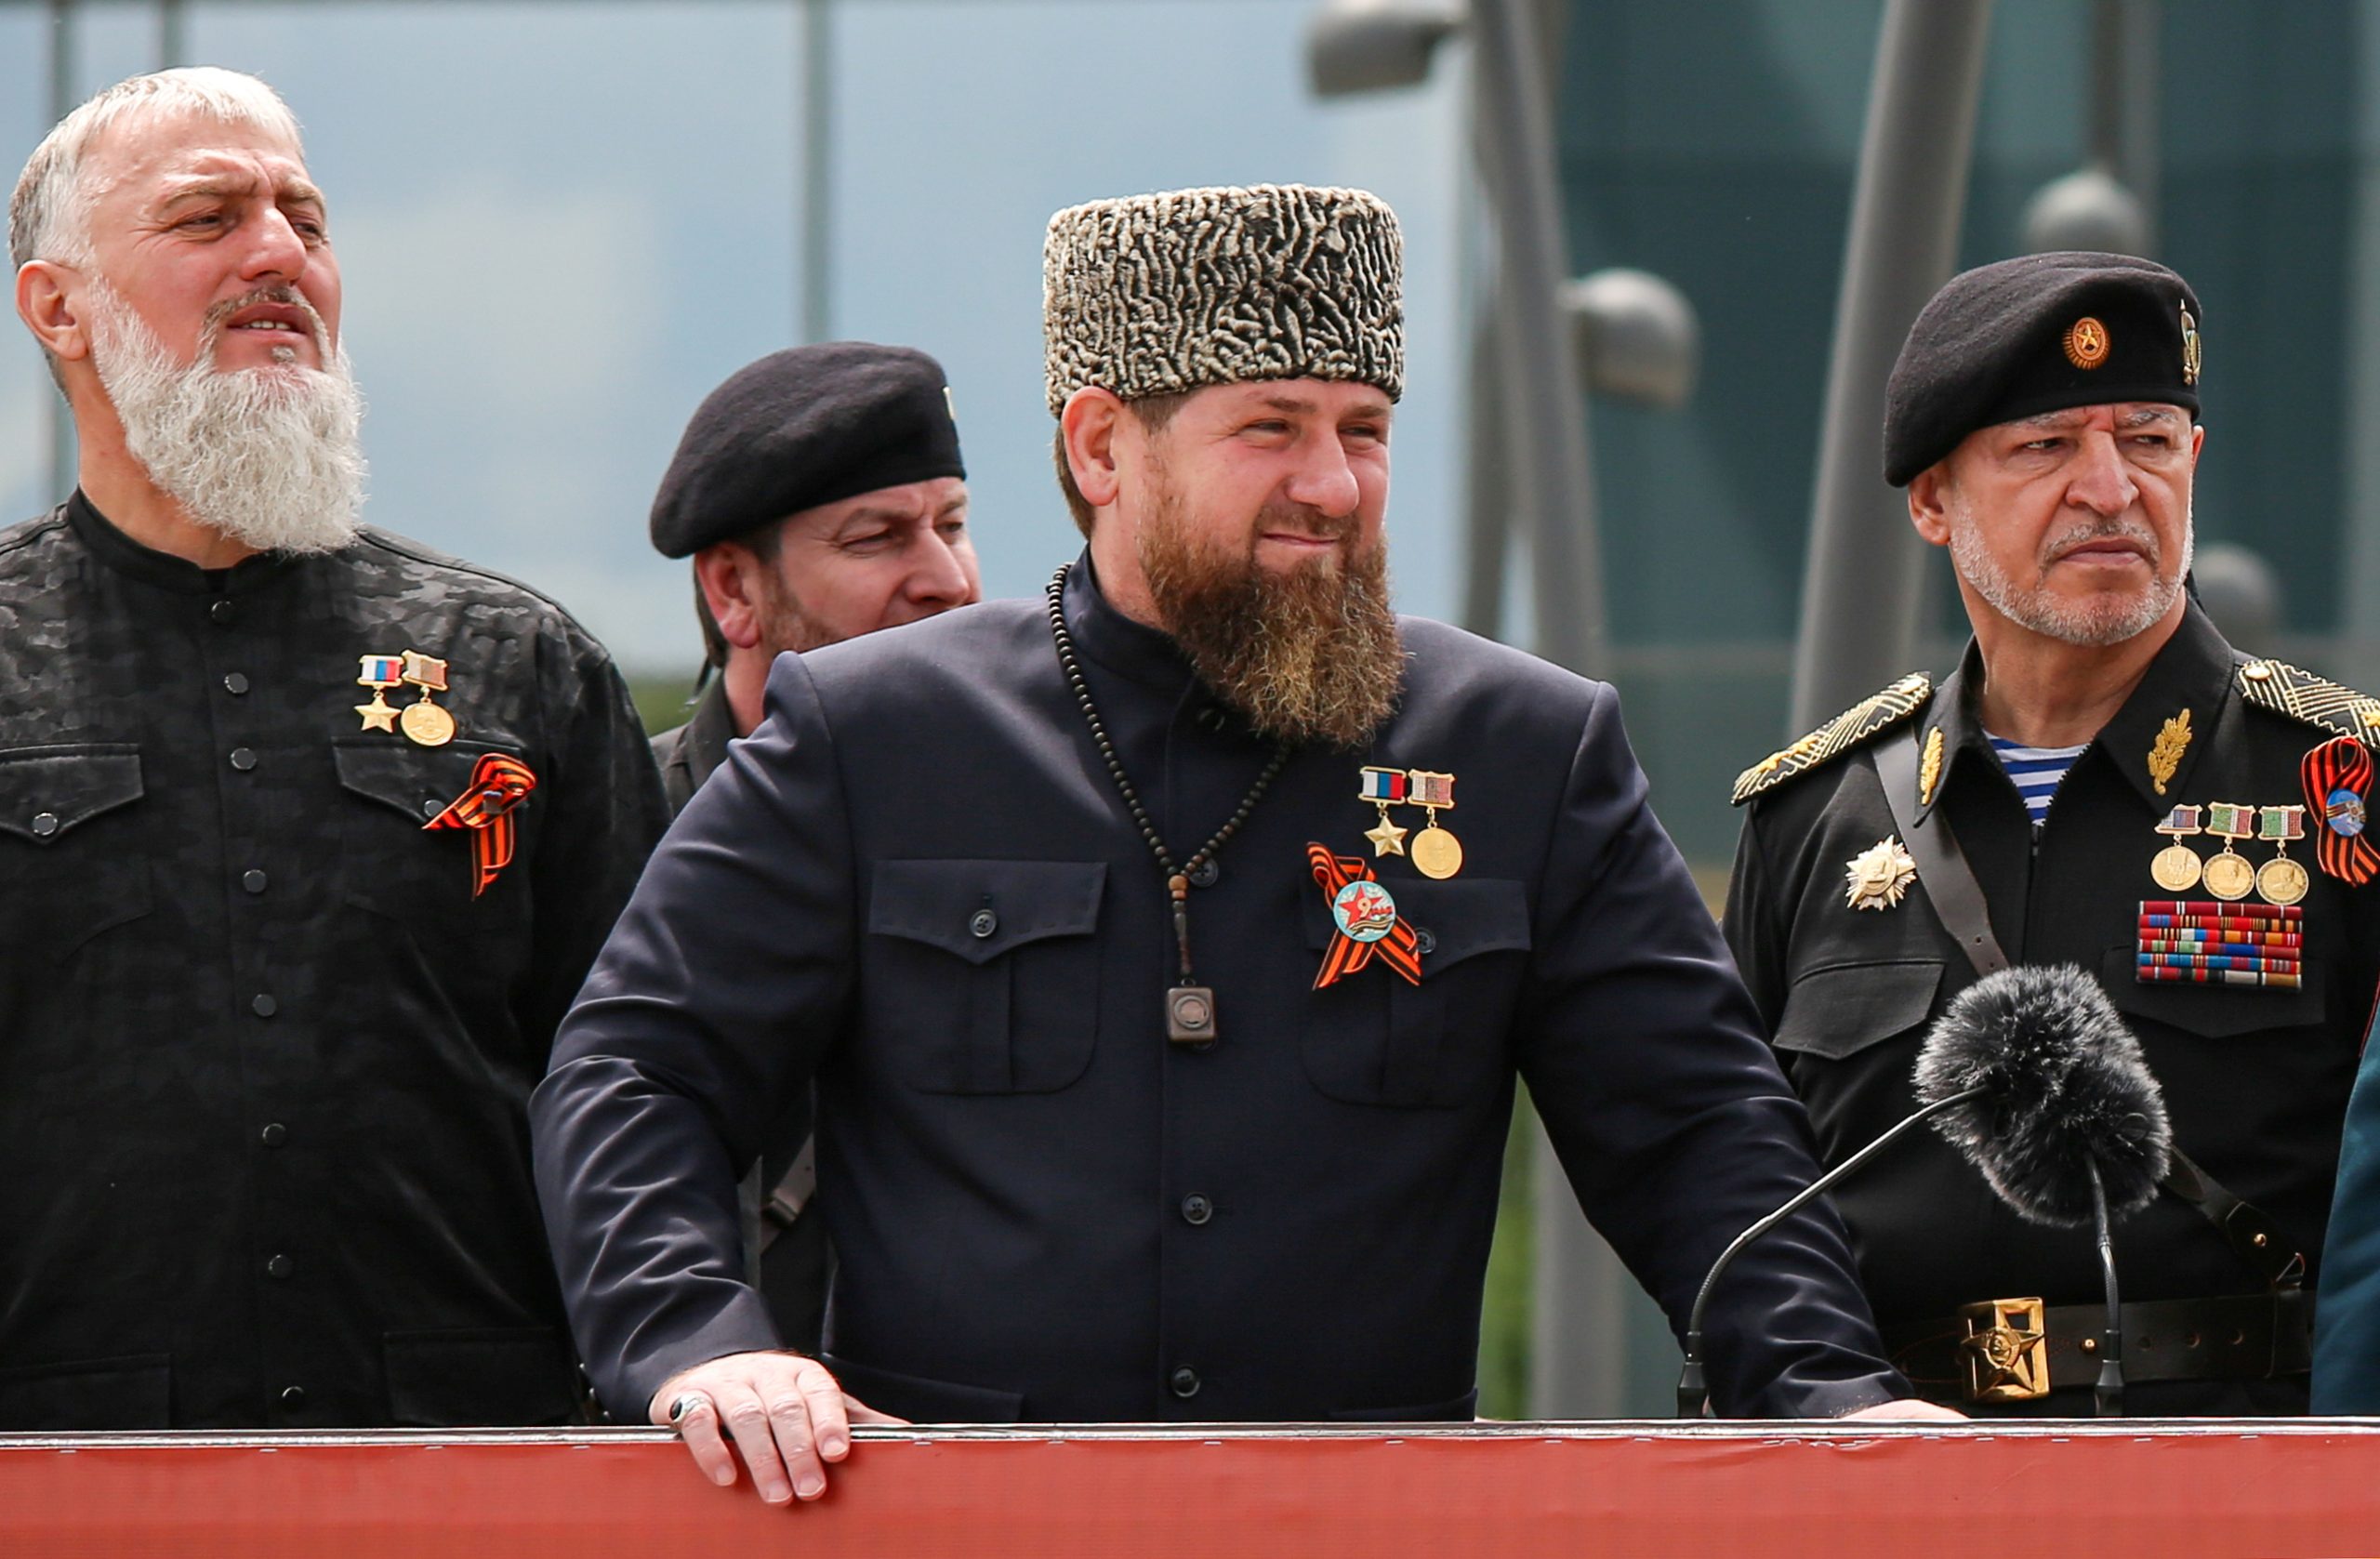 Photo: Head of the Chechen Republic Ramzan Kadyrov (С), Interior Minister Ruslan Alkhanov (R) and Russia's State Duma member Adam Delimkhanov attend a military parade on Victory Day, which marks the 77th anniversary of the victory over Nazi Germany in World War Two, in the Chechen capital Grozny, Russia May 9, 2022. Credit: REUTERS/Chingis Kondarov